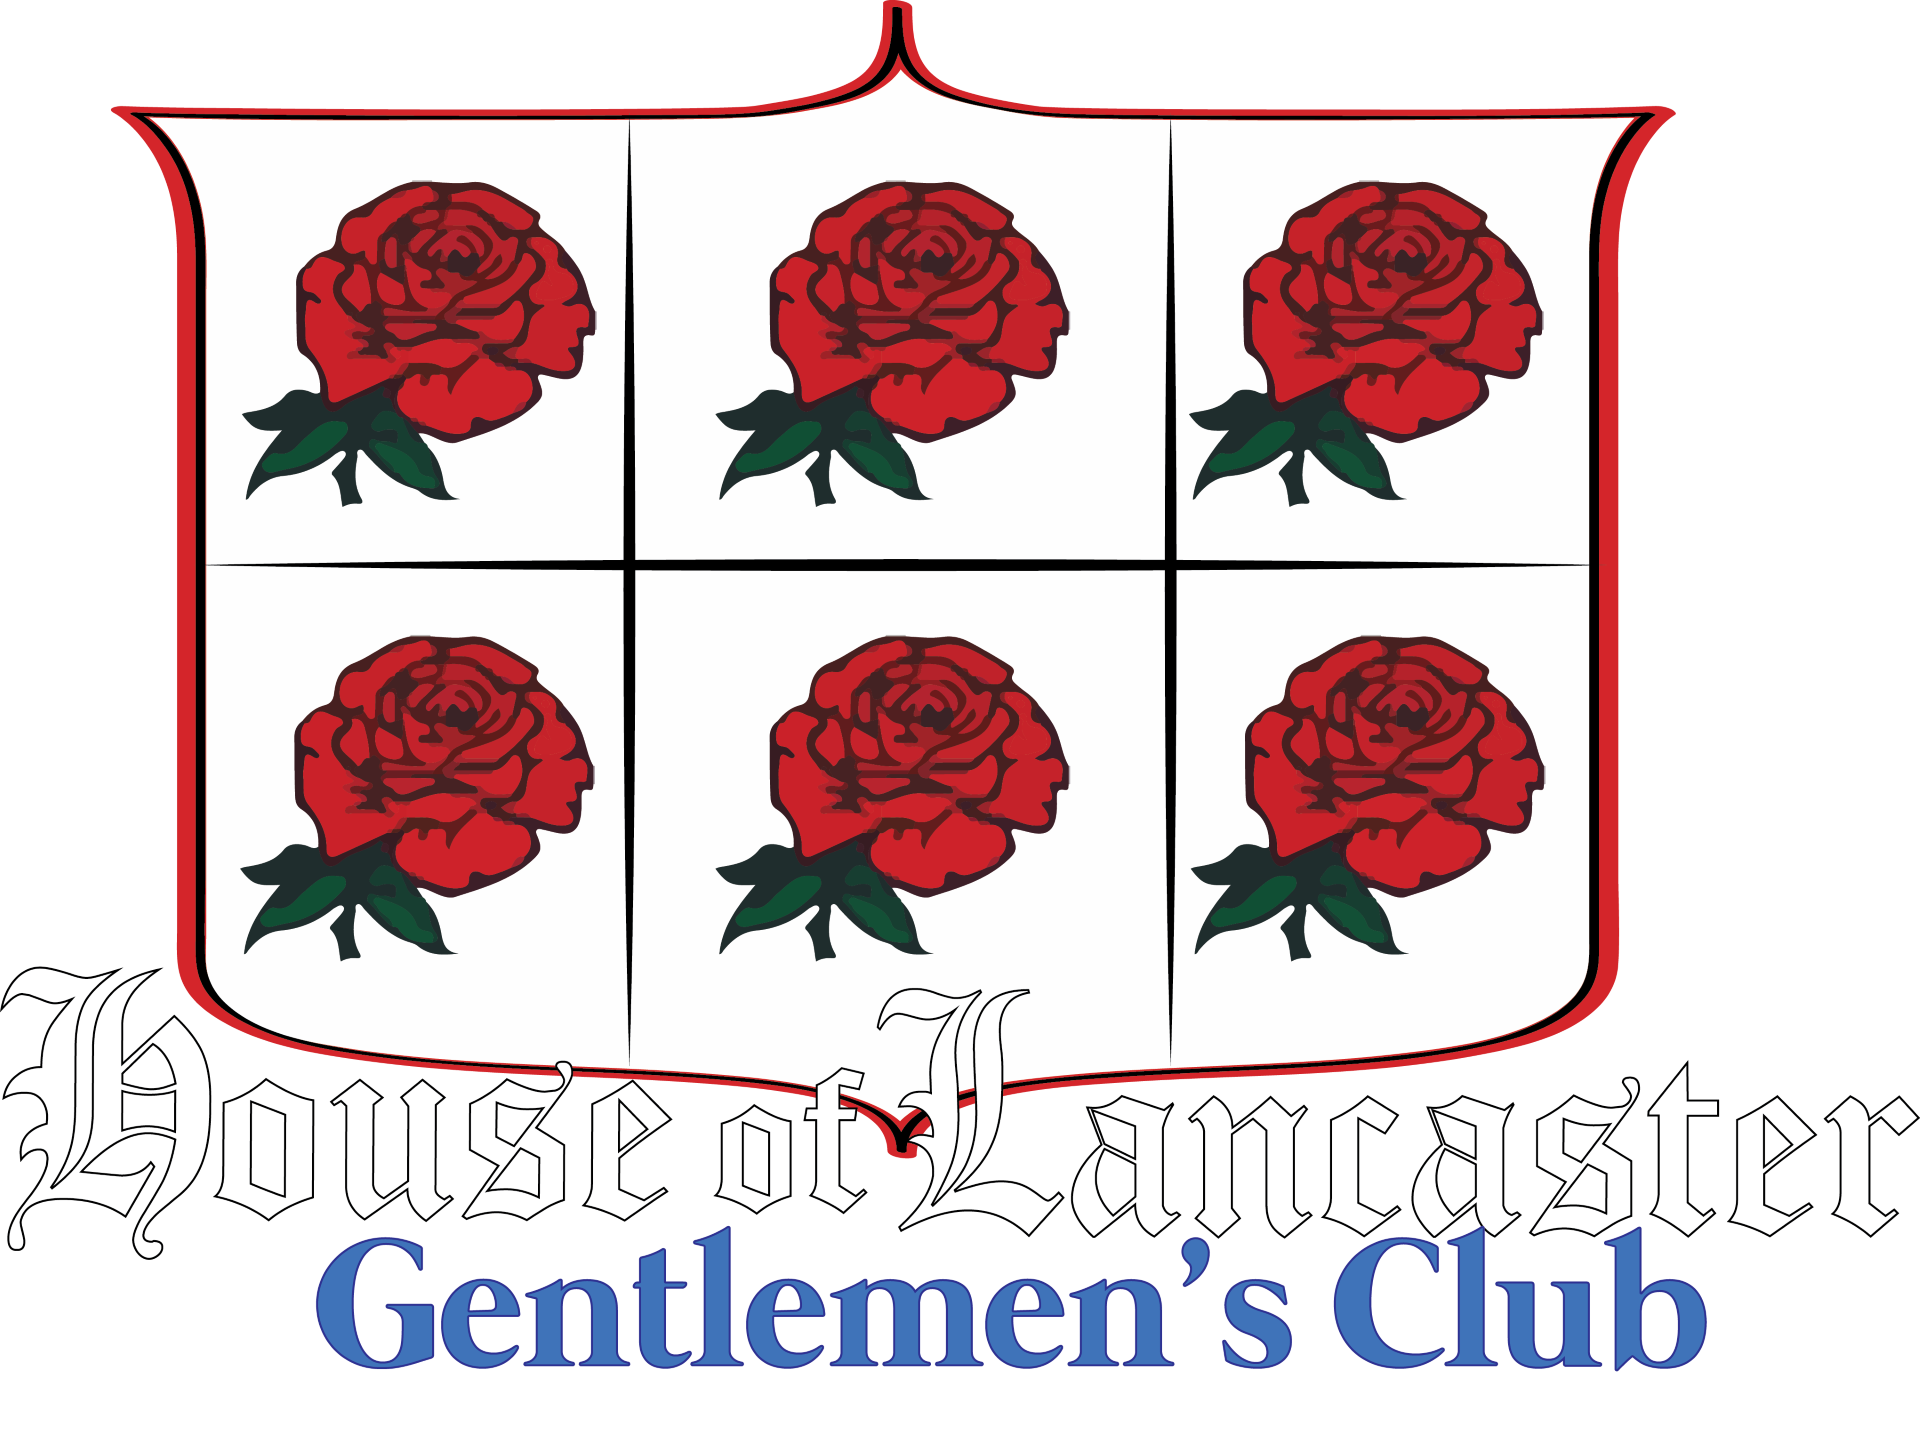 The House of Lancaster